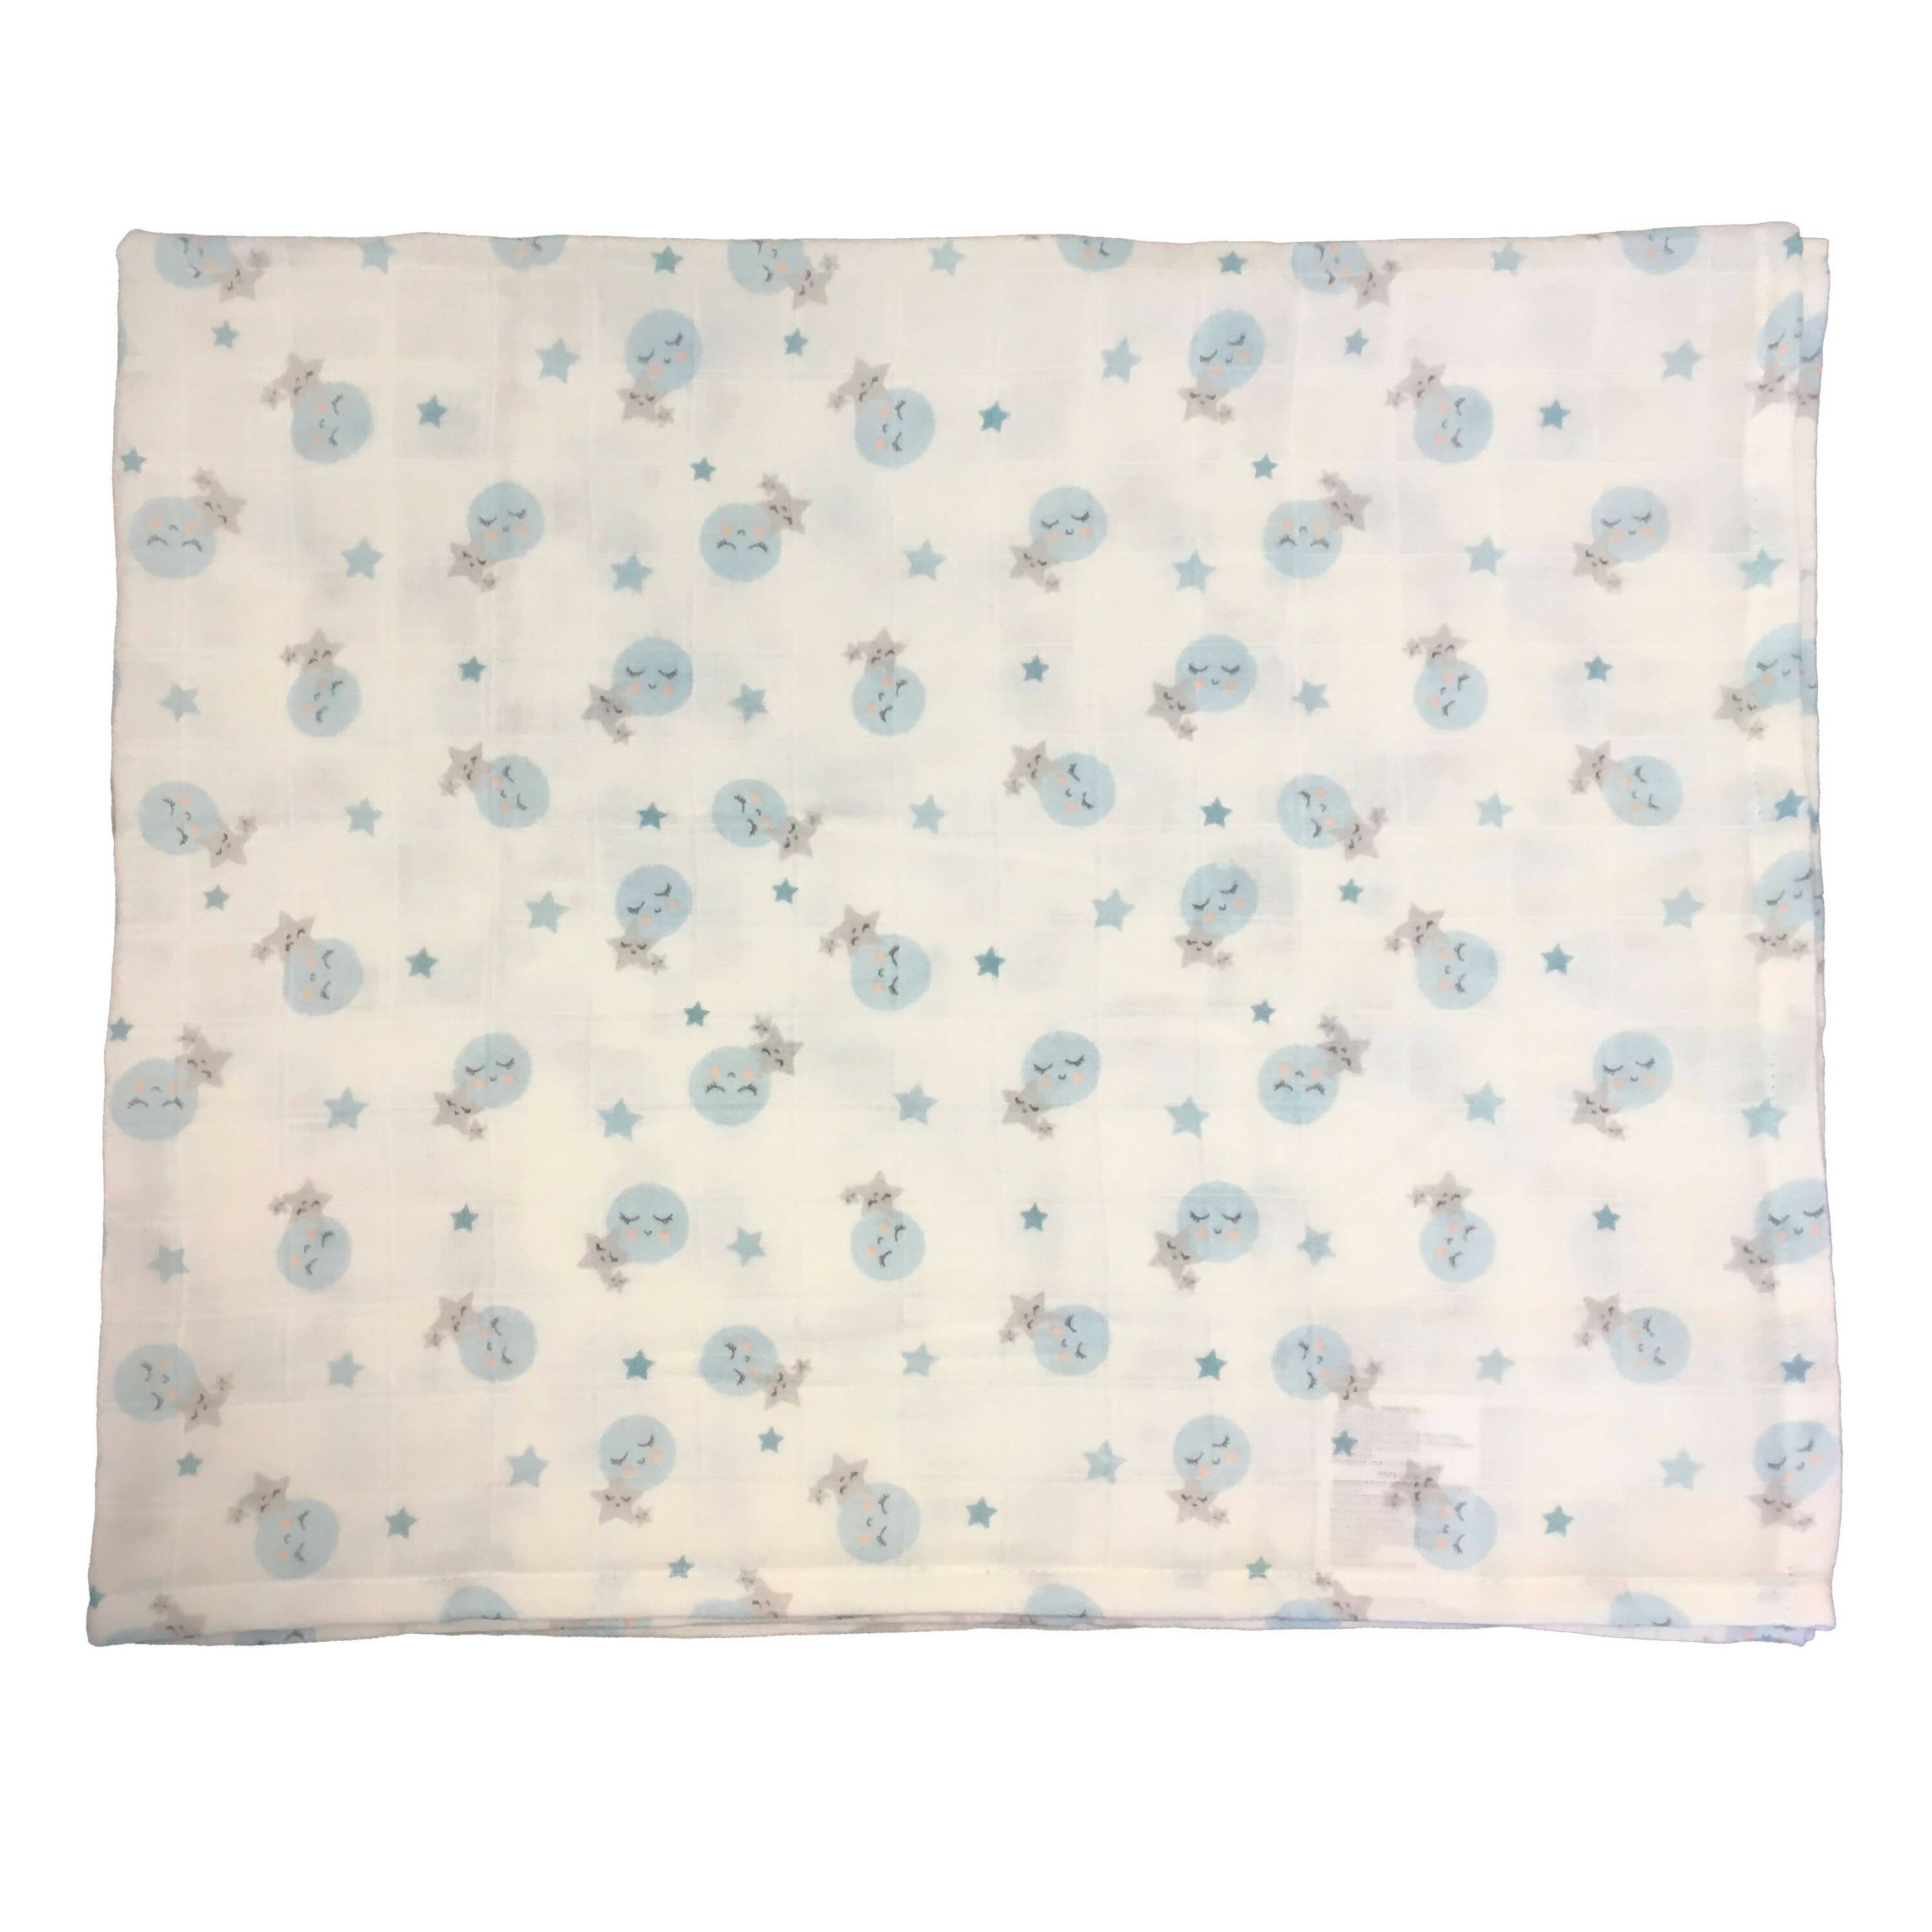 Blue Moon Printed Baby Blanket, Newborn Baby Swaddle, Mother's Cover Up, 100% Cotton Muslin, Baby Shower Gifts - Wear Sierra